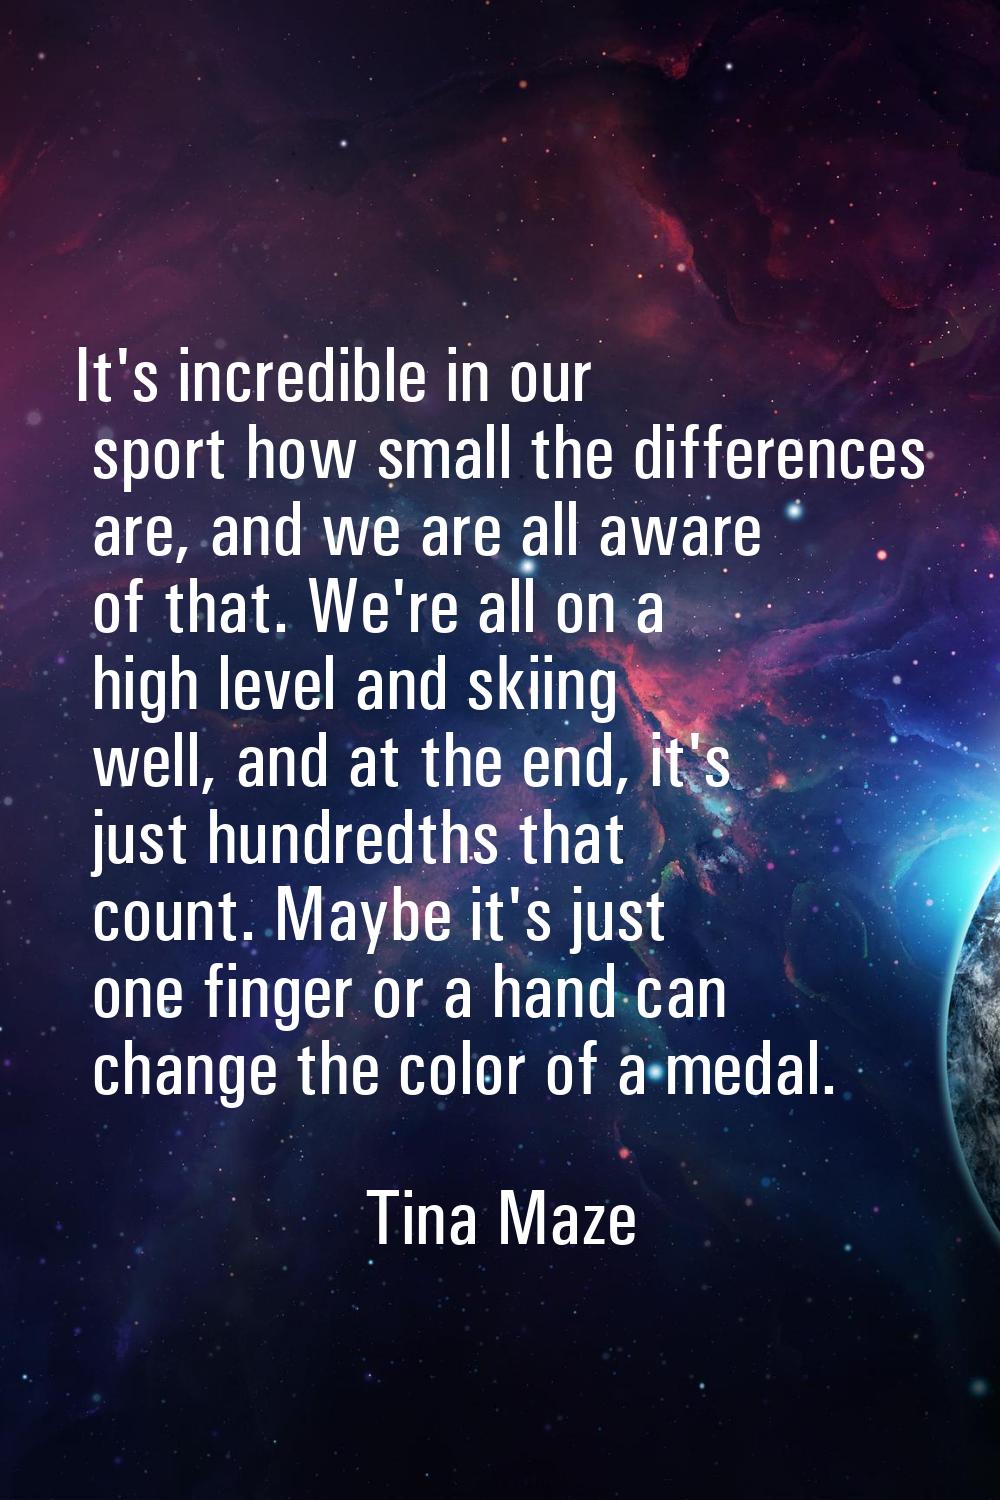 It's incredible in our sport how small the differences are, and we are all aware of that. We're all